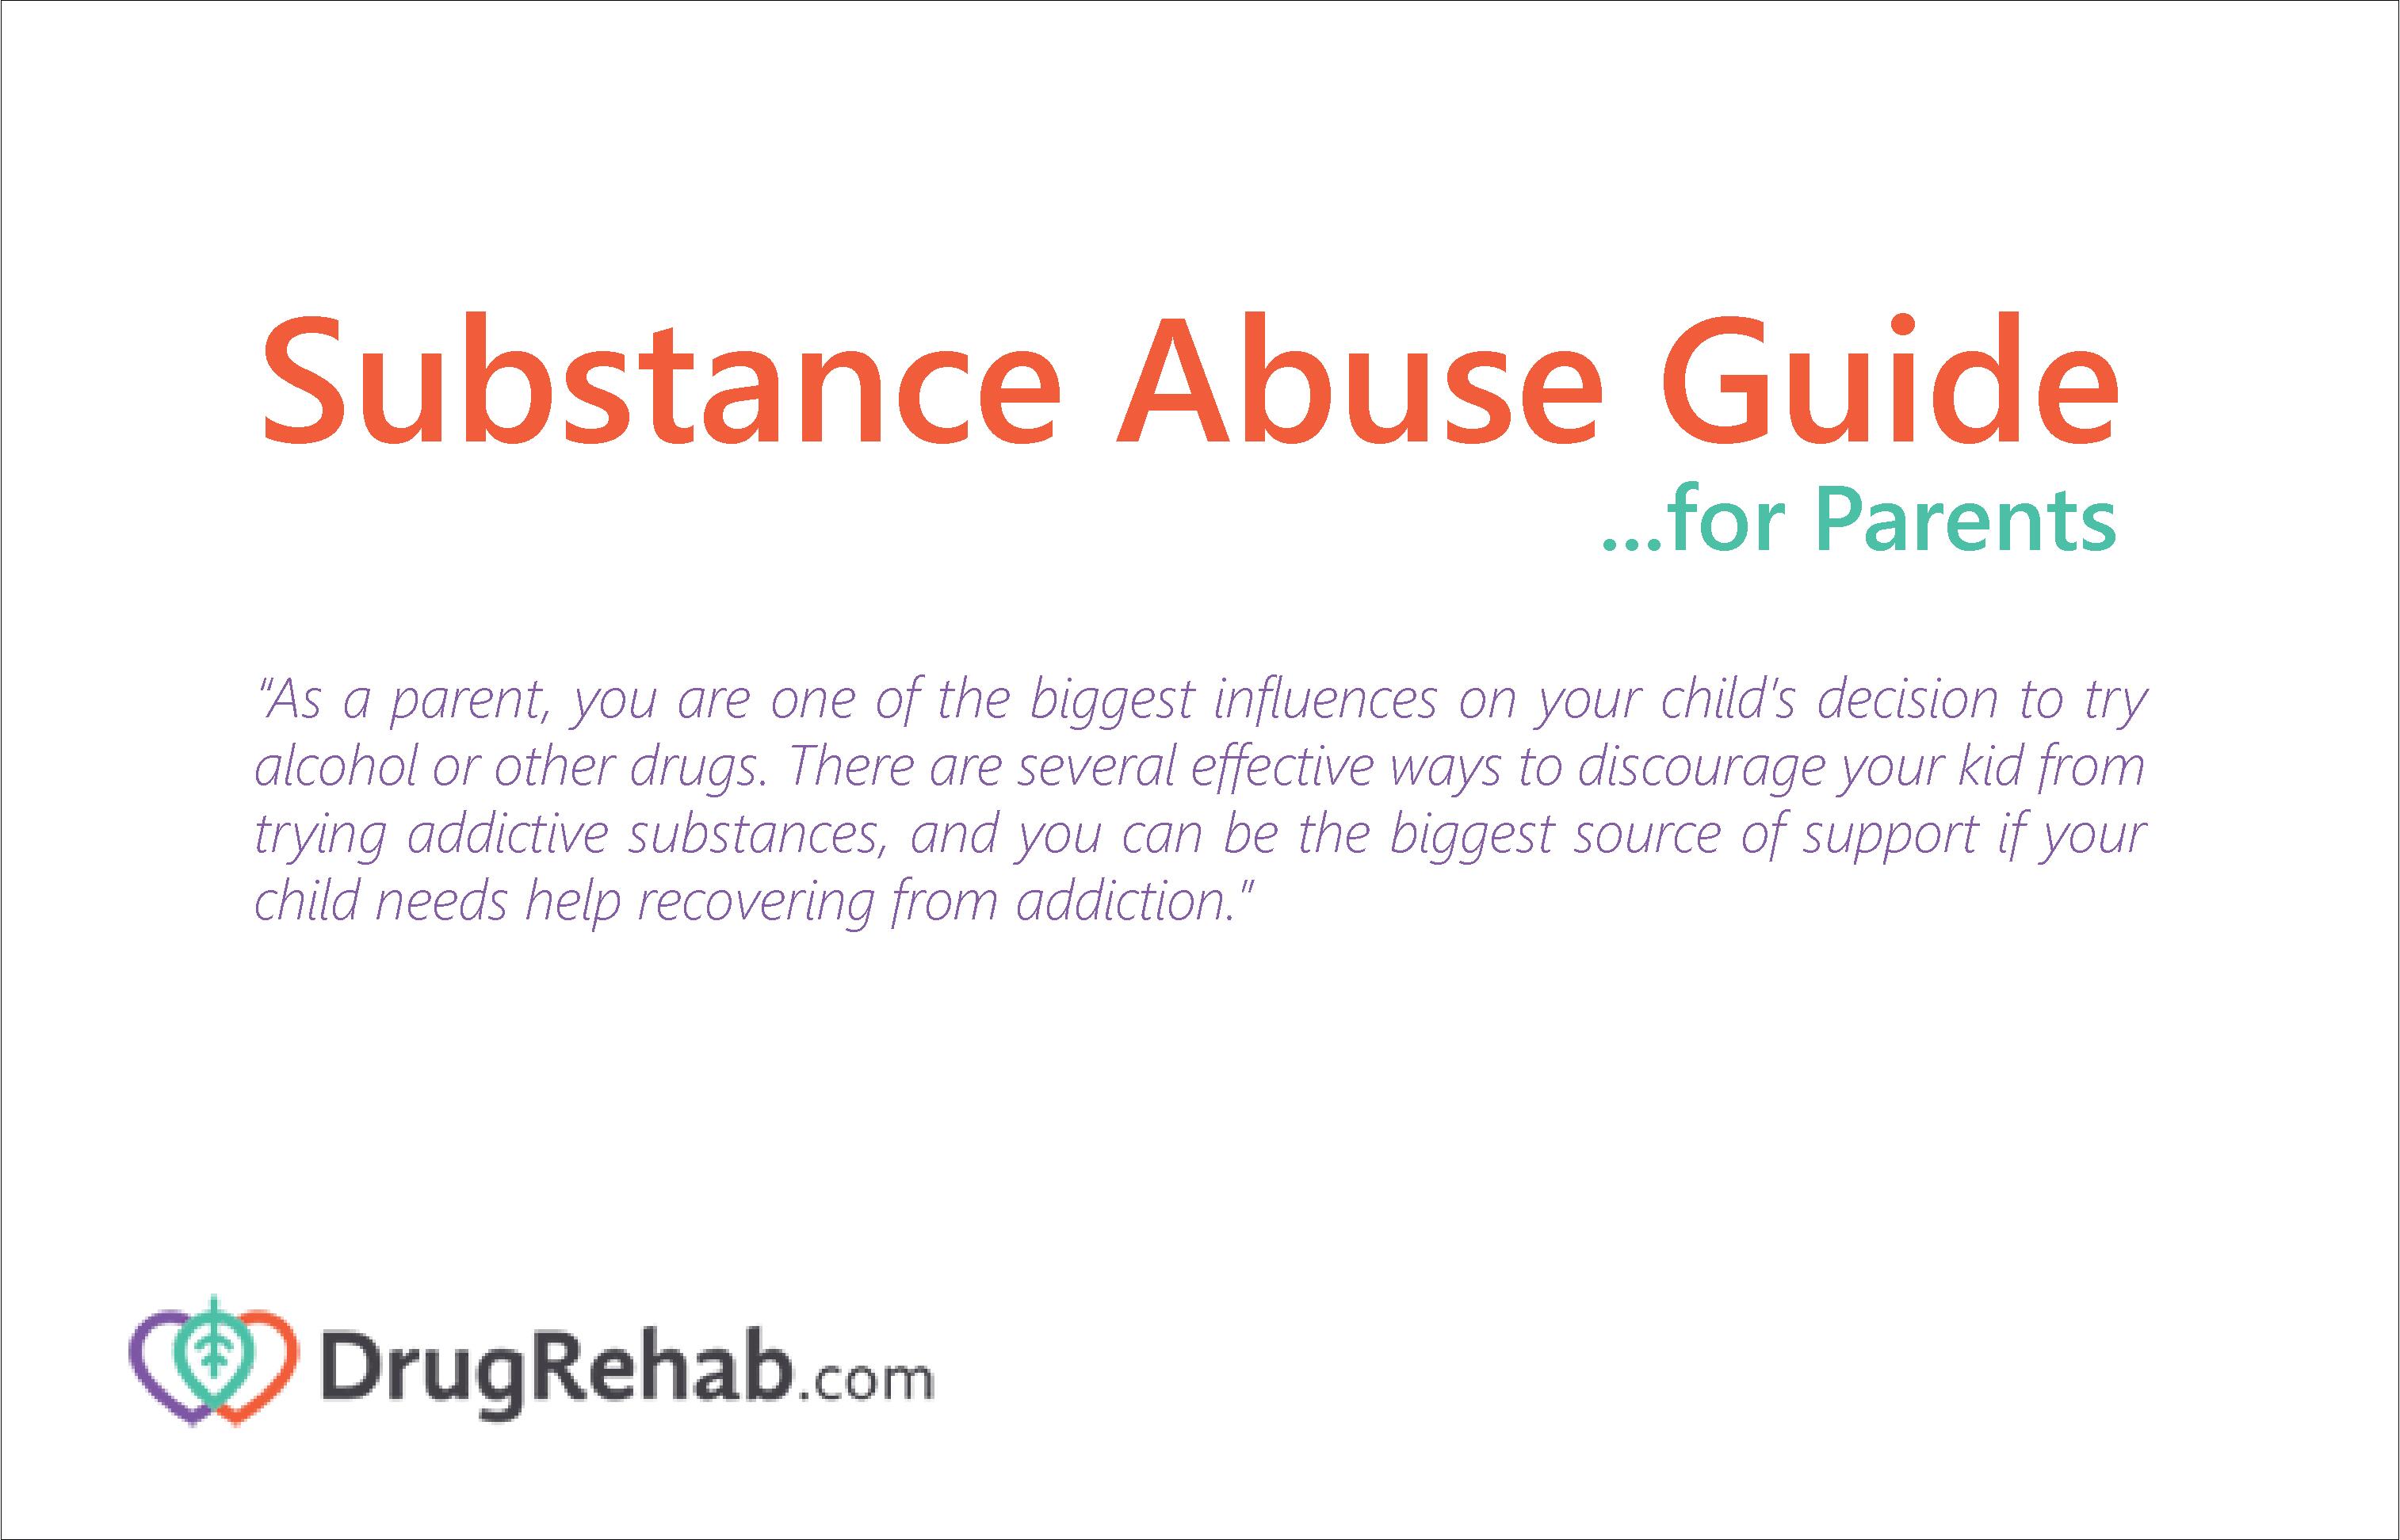 Substance Abuse Guide for parents